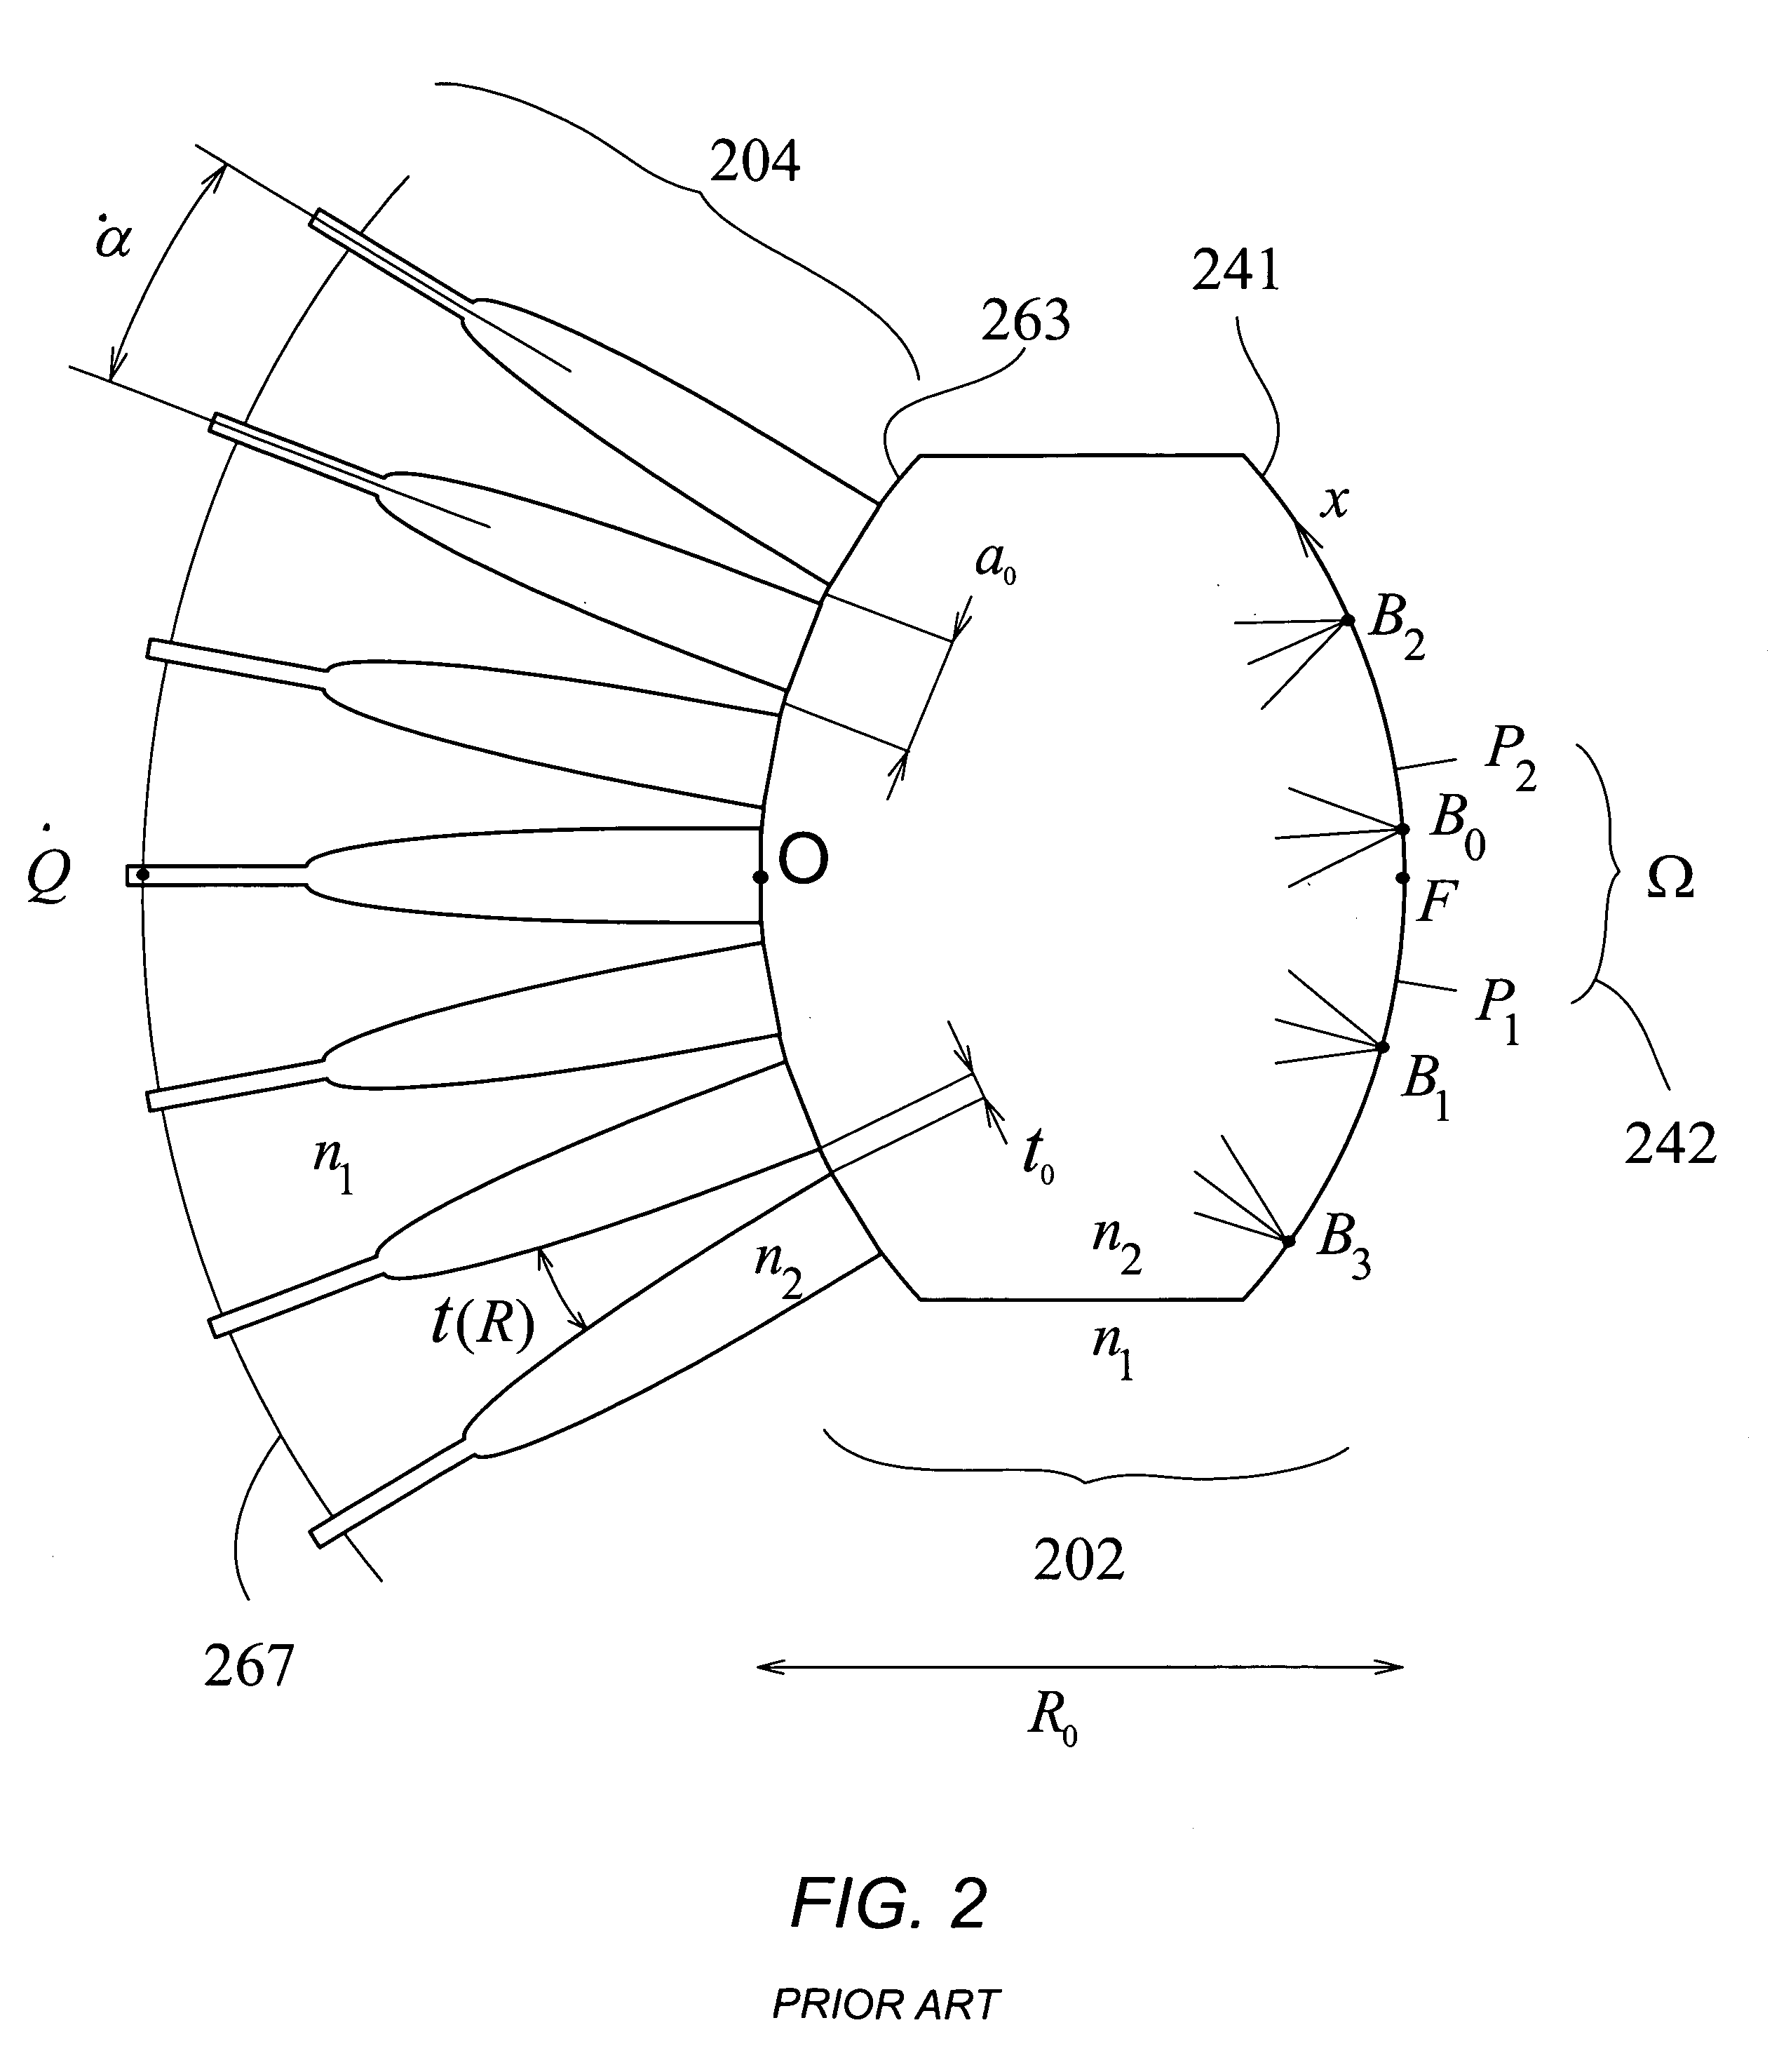 Efficient waveguide arrays with optimized matching transitions